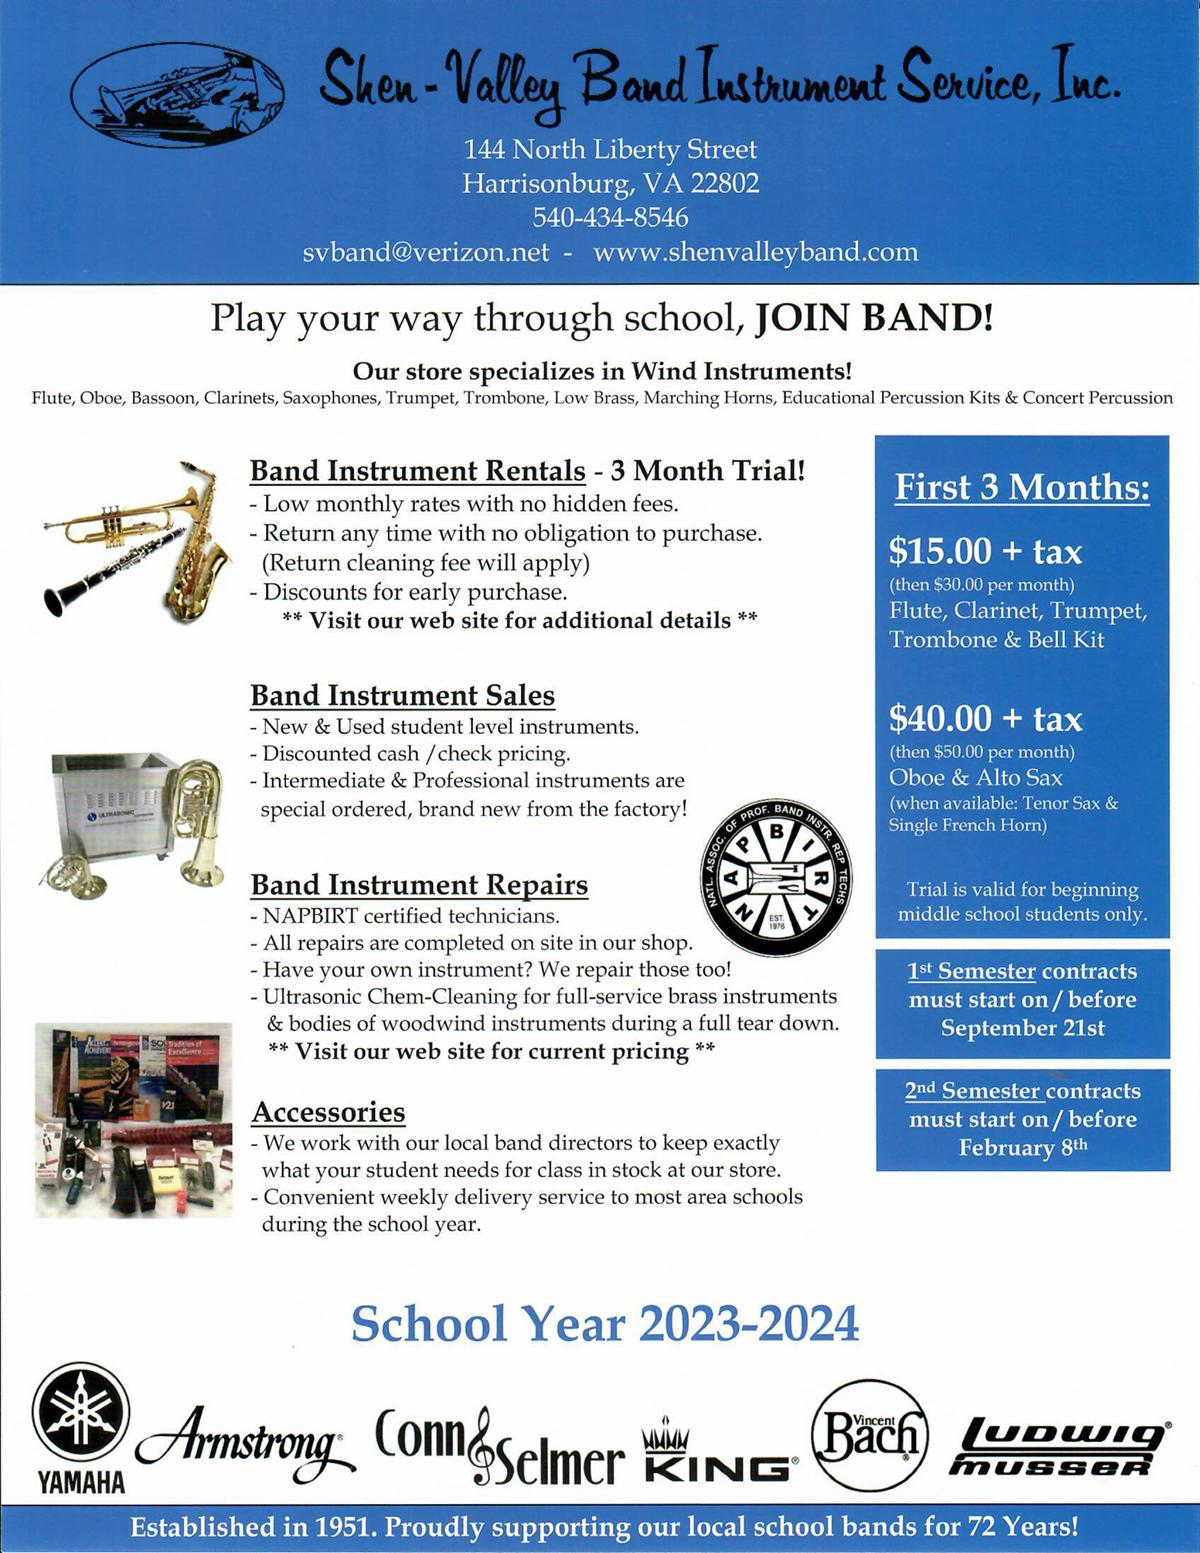 Shen-Valley Band rents musical instruments